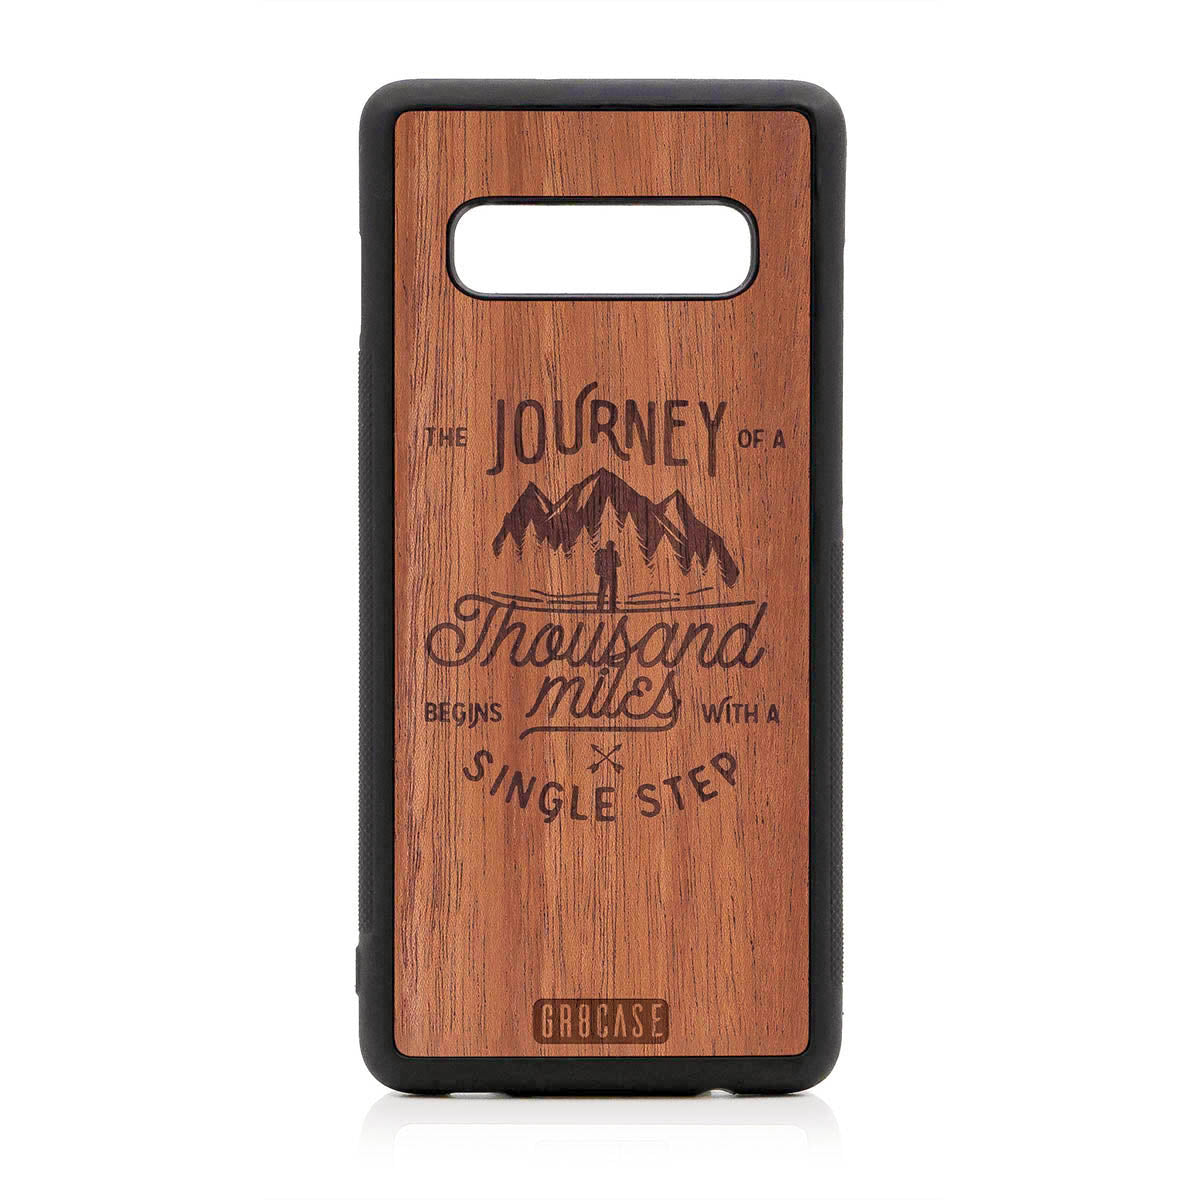 The Journey Of A Thousand Miles Begins With A Single Step Design Wood Case For Samsung Galaxy S10 Plus